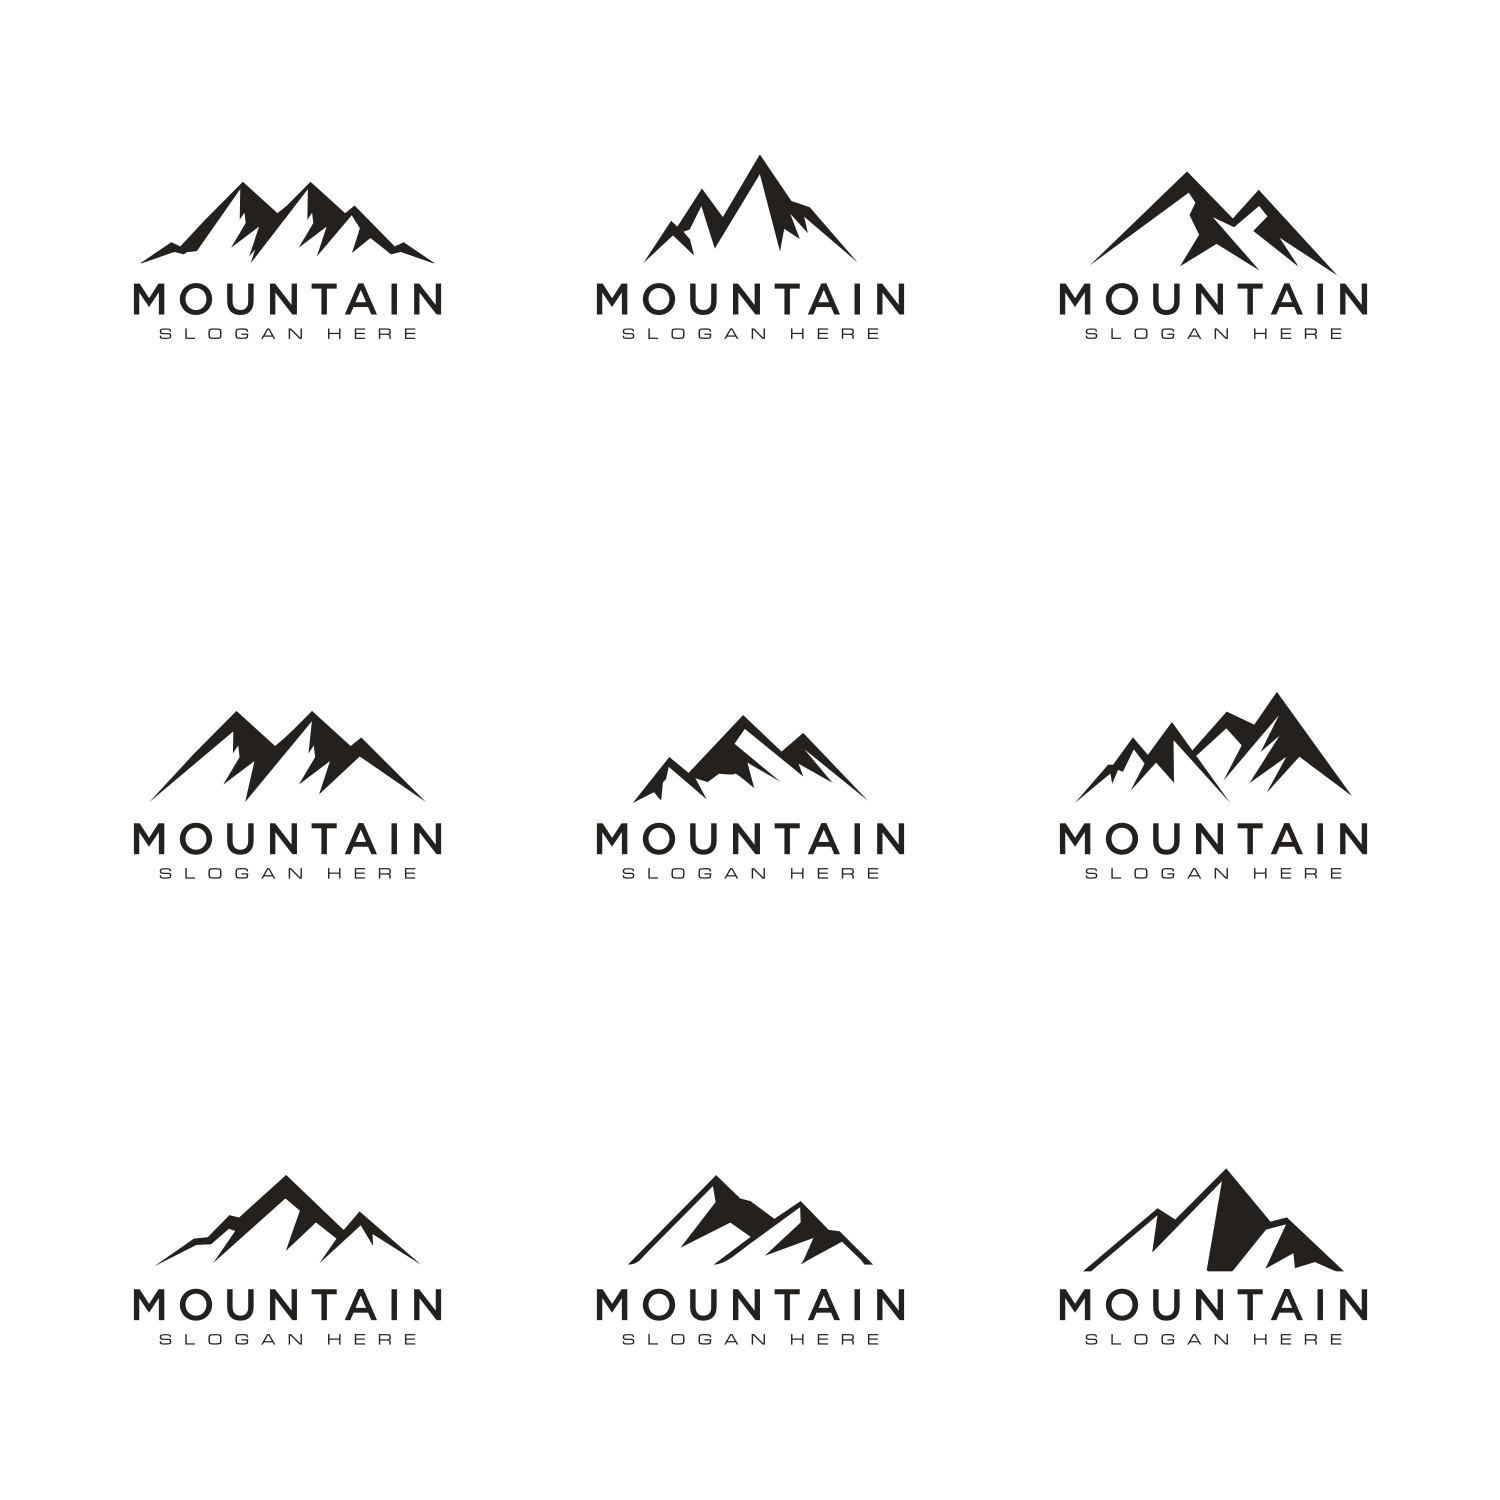 Set of 36 Mountain Logo Vector images.